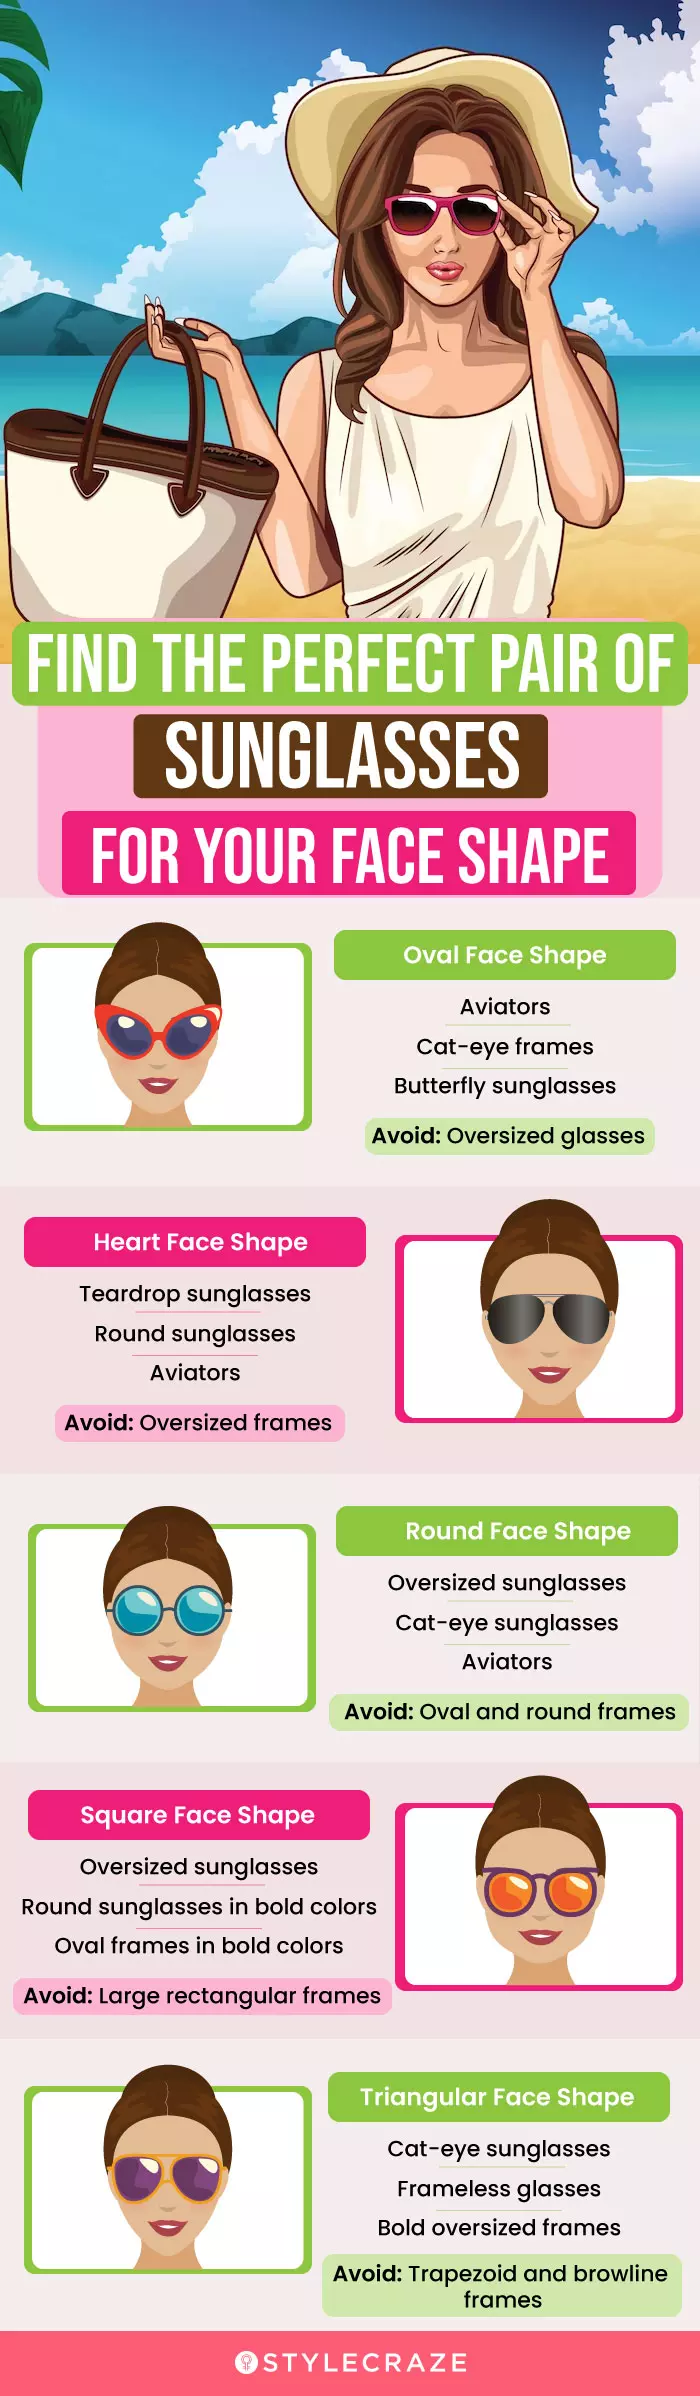 The Best Haircut for Your Body Type to Balance the Proportions